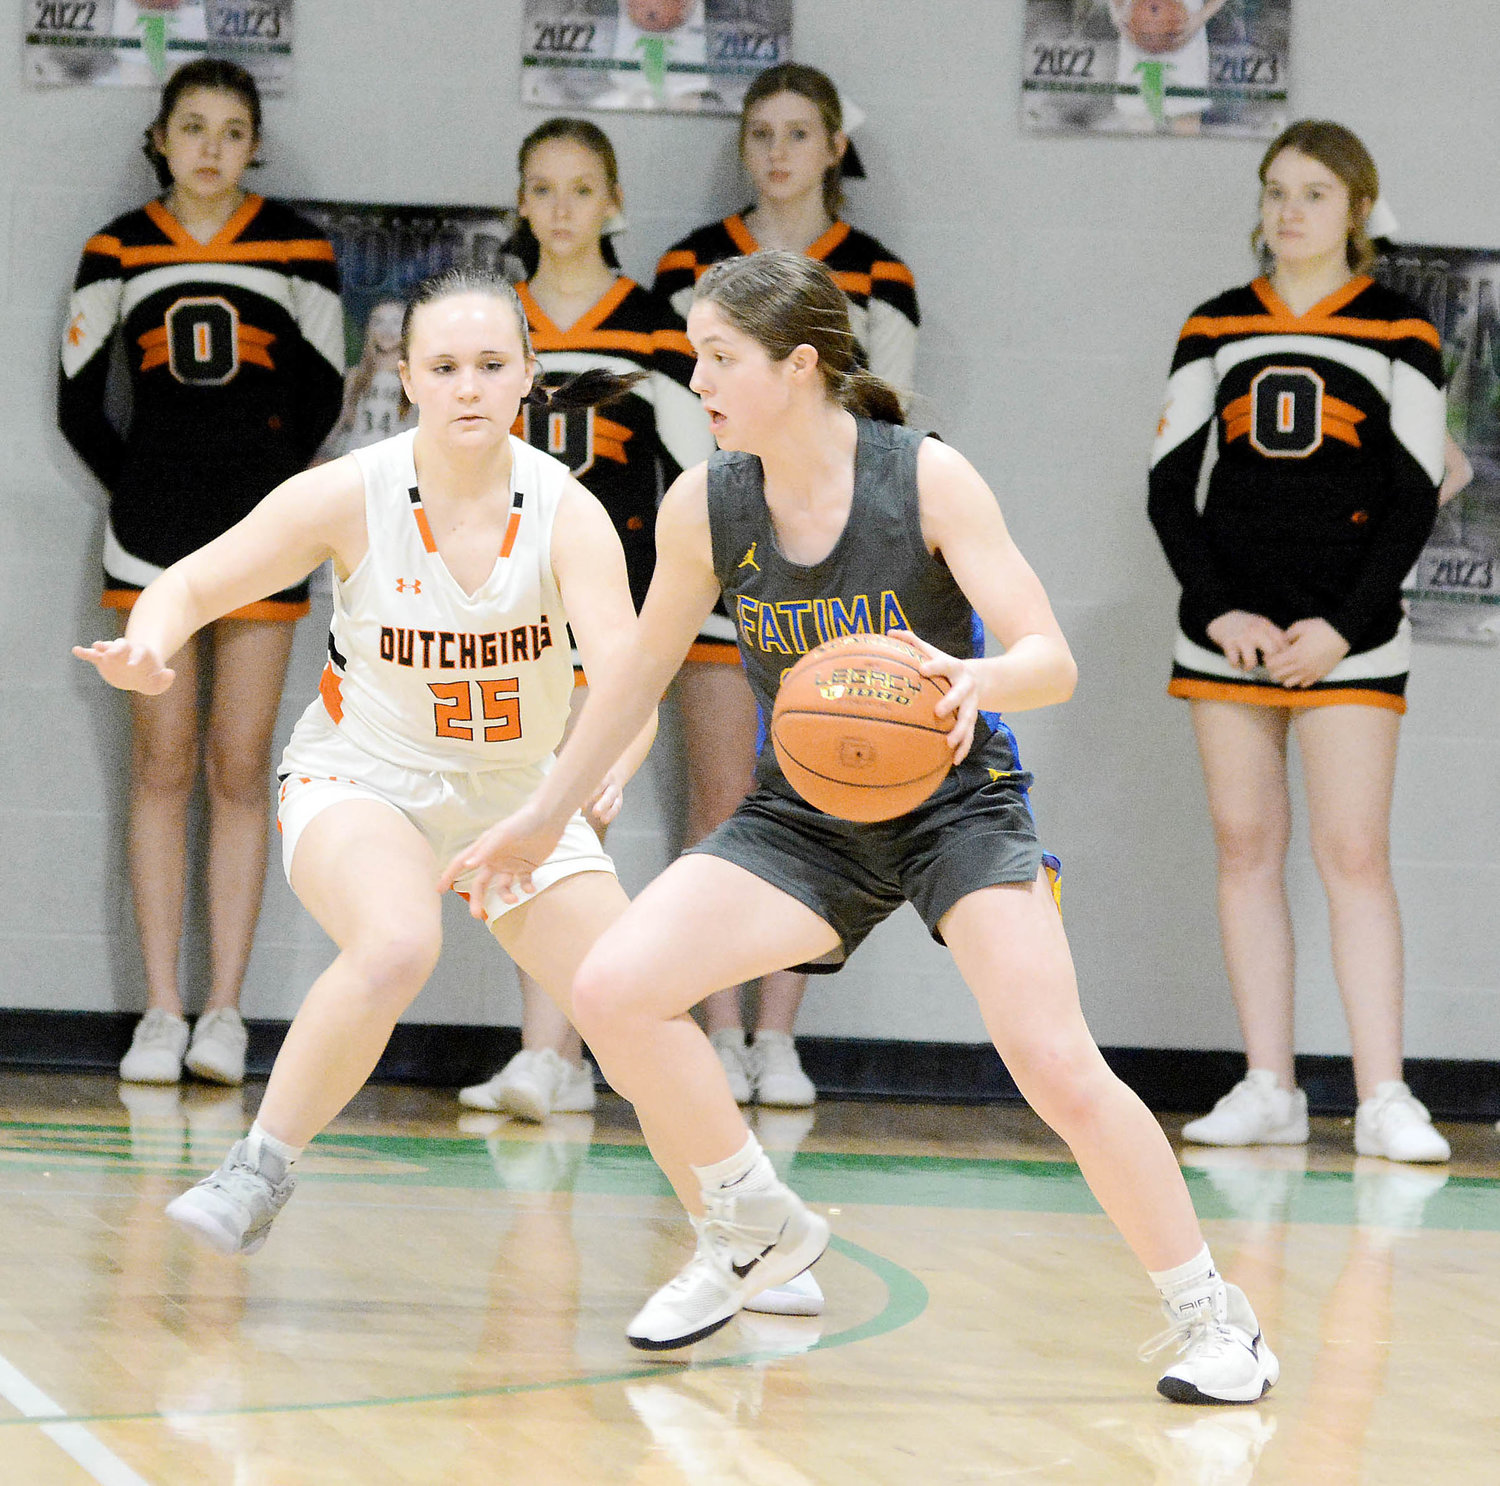 Anya Binkhoelter (left) keeps her eye on Fatima’s Lucy Crede handling the basketball during last Thursday’s MSHSAA Class 4, District 10 semifinals at Blair Oaks High School.